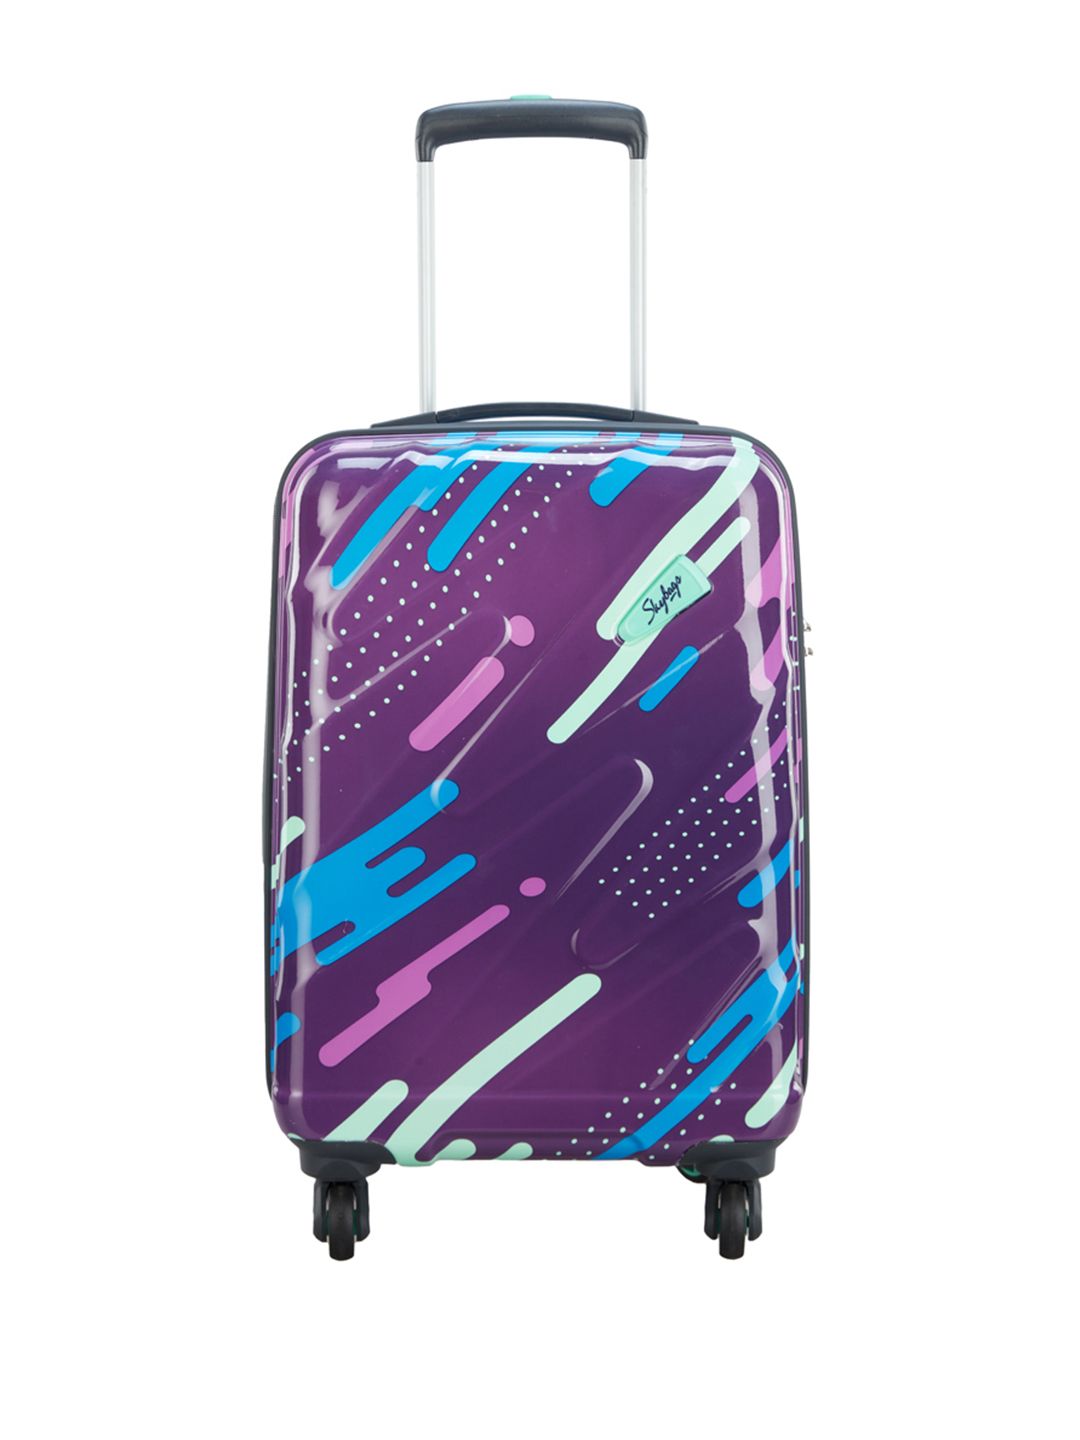 Skybags Purple Shooting Star 55 360 Cabin Trolley Suitcase Price in India